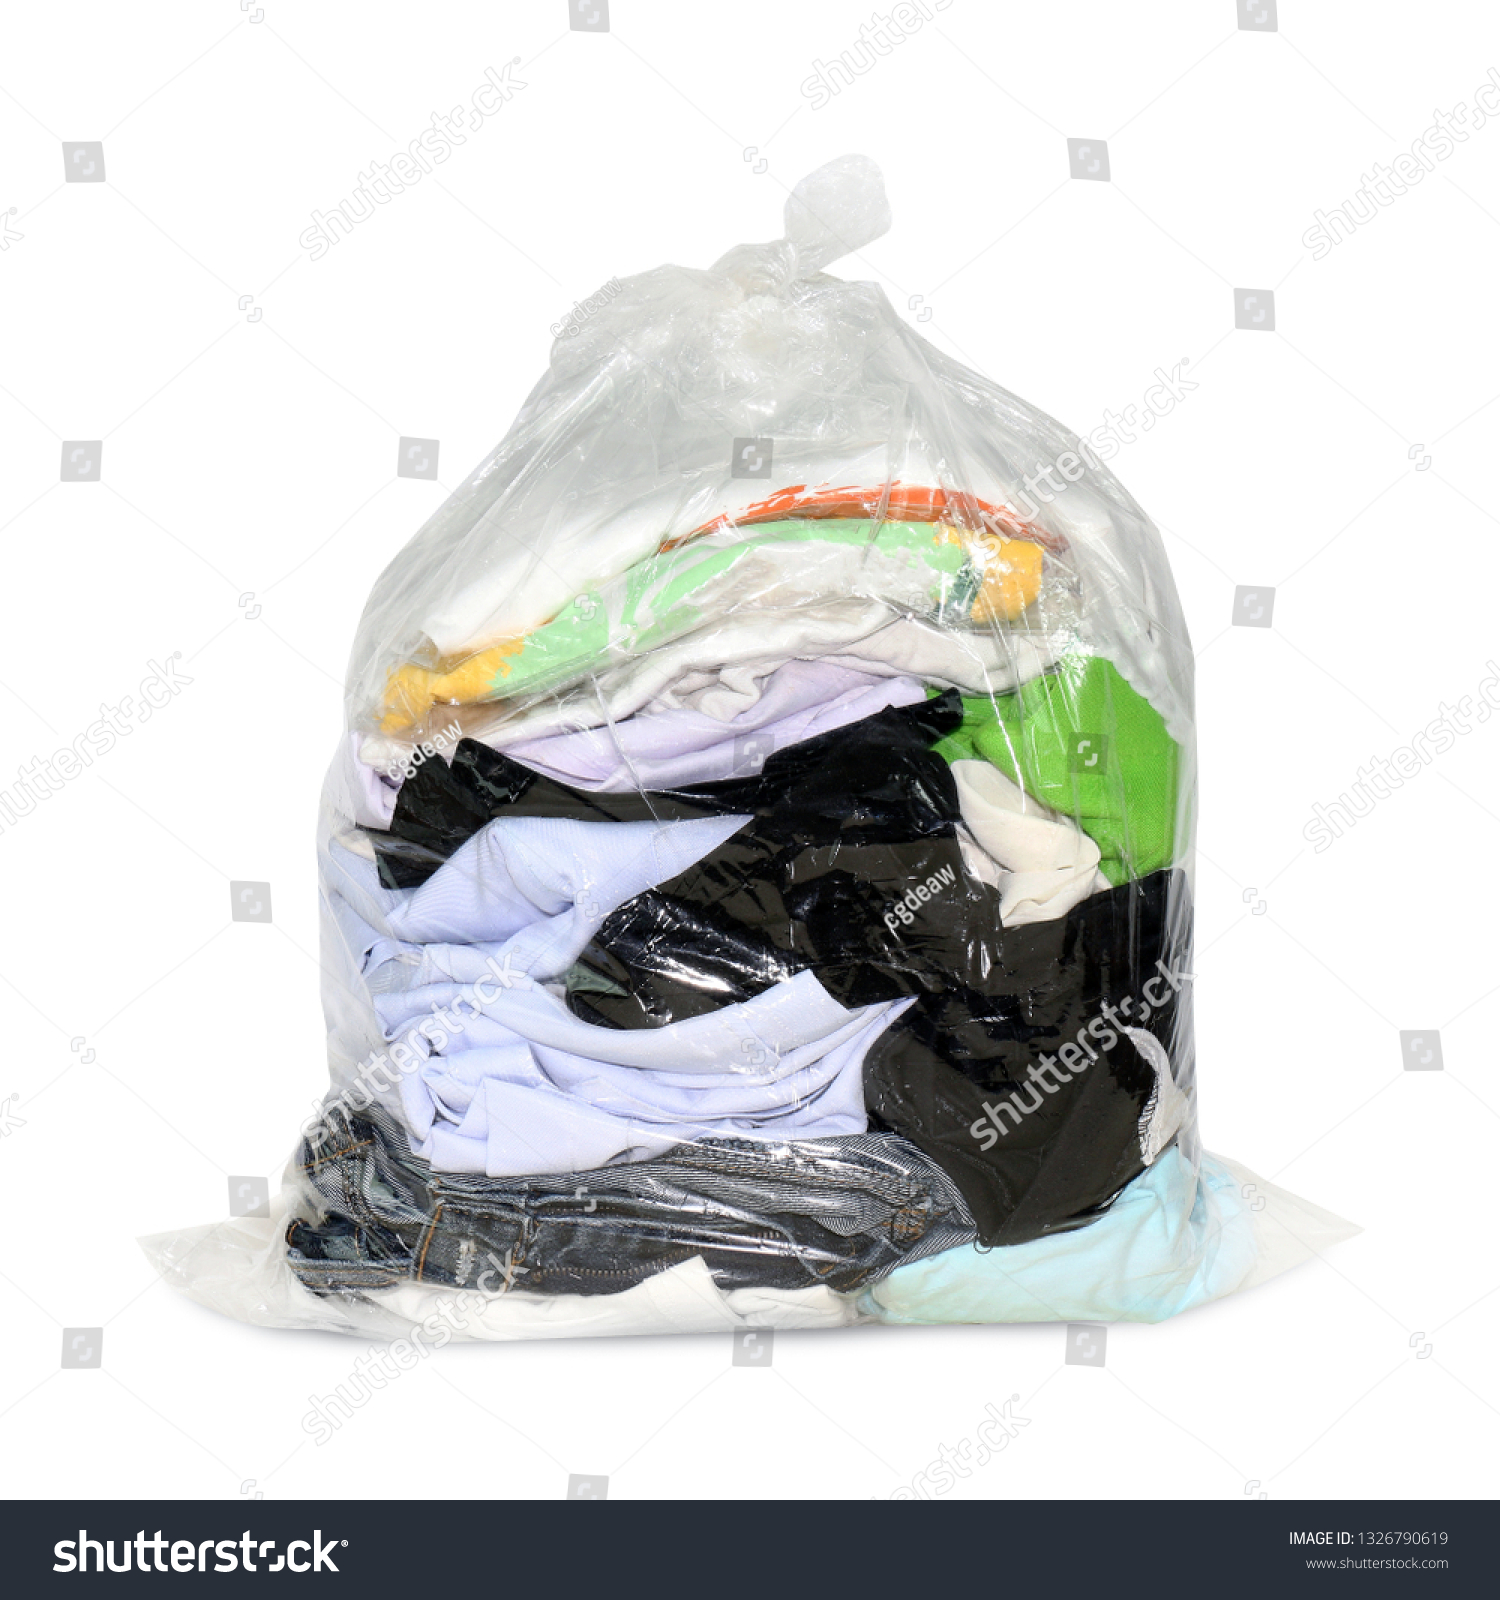 Second Hand Clothes Plastic Bag Isolated Stock Photo 1326790619 ...